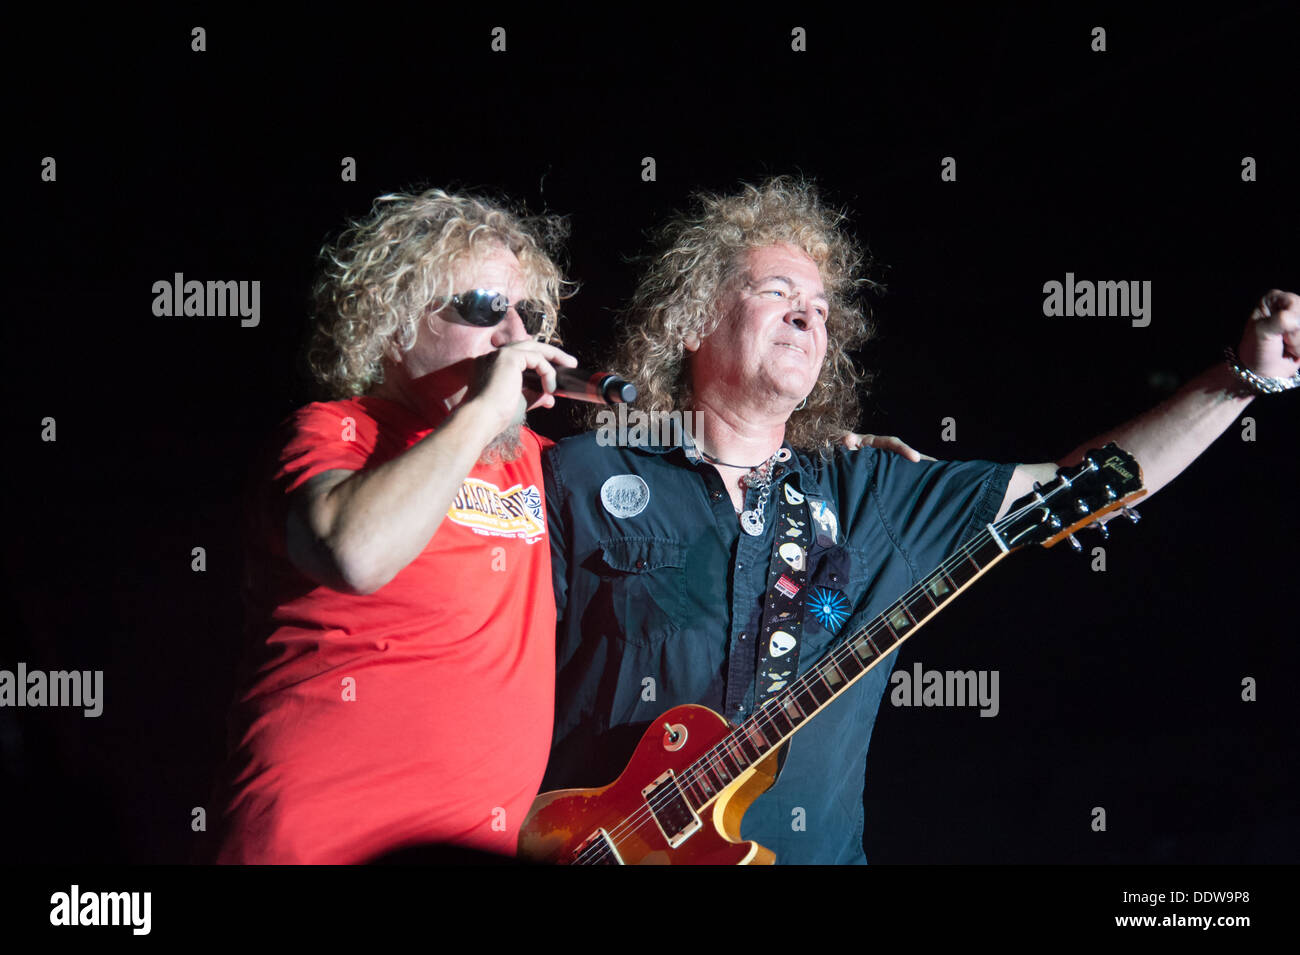 LINCOLN, CA - September 5: Sammy Hagar (R) and Dave Manaketti perform in support of Sammy Hagar's 'Forty Decades of Rock' tour a Stock Photo